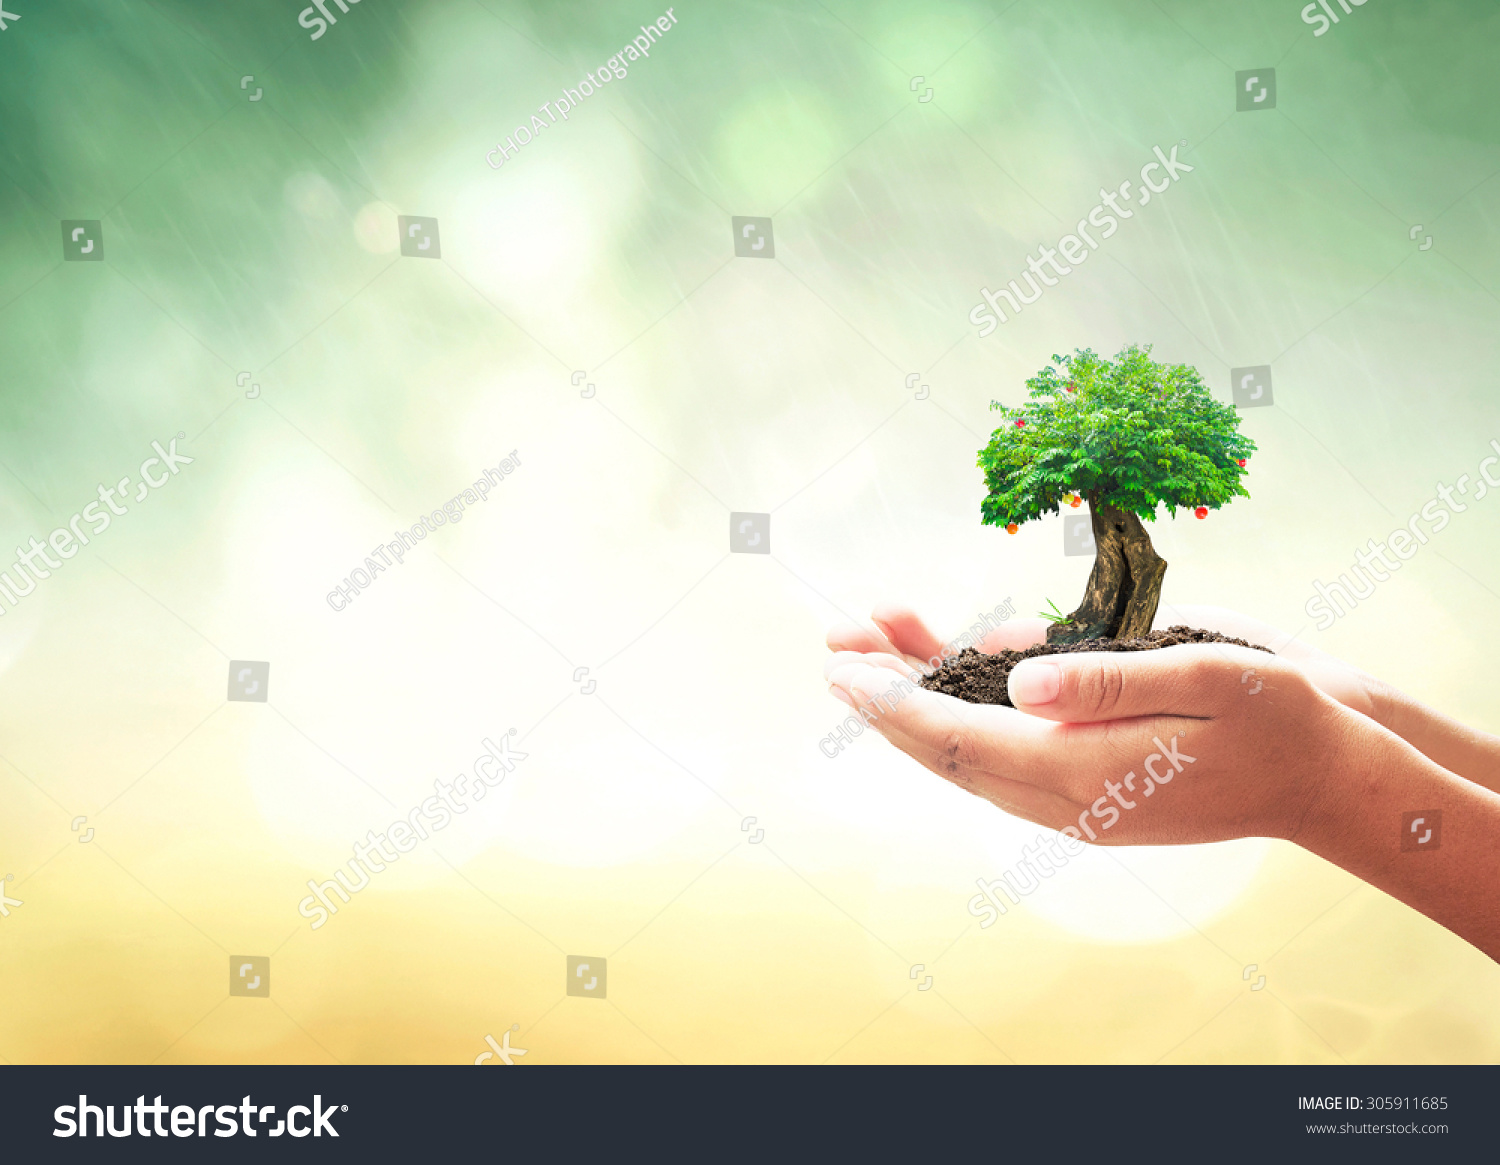 World food day concept: Human hands holding grow fruitful tree over blurred forests background #305911685